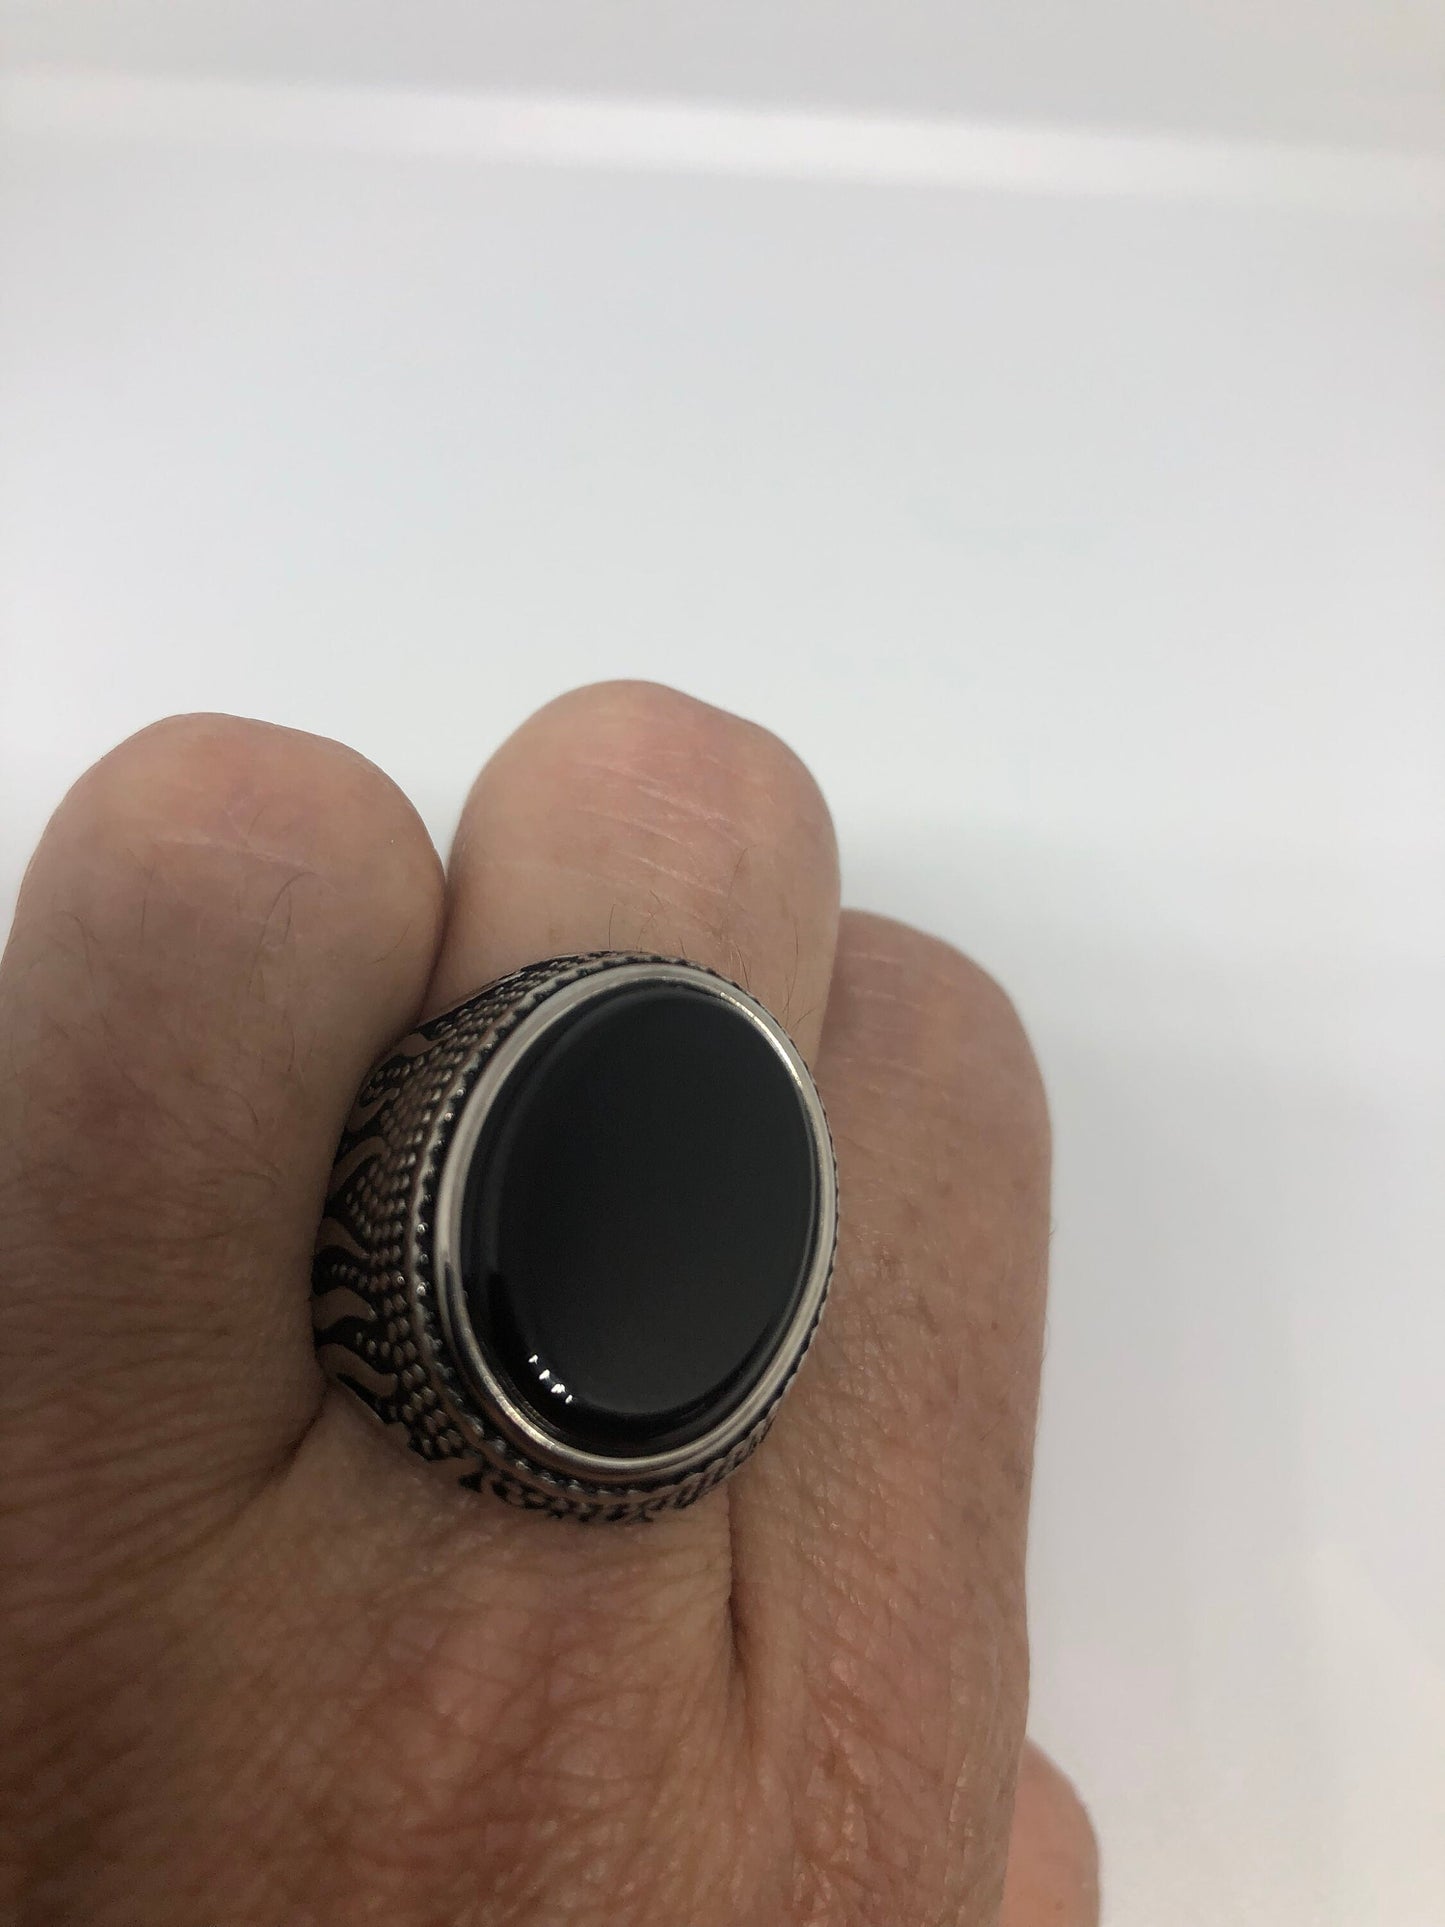 Vintage Gothic Black Onyx Stainless Steel Flame Mens Ring